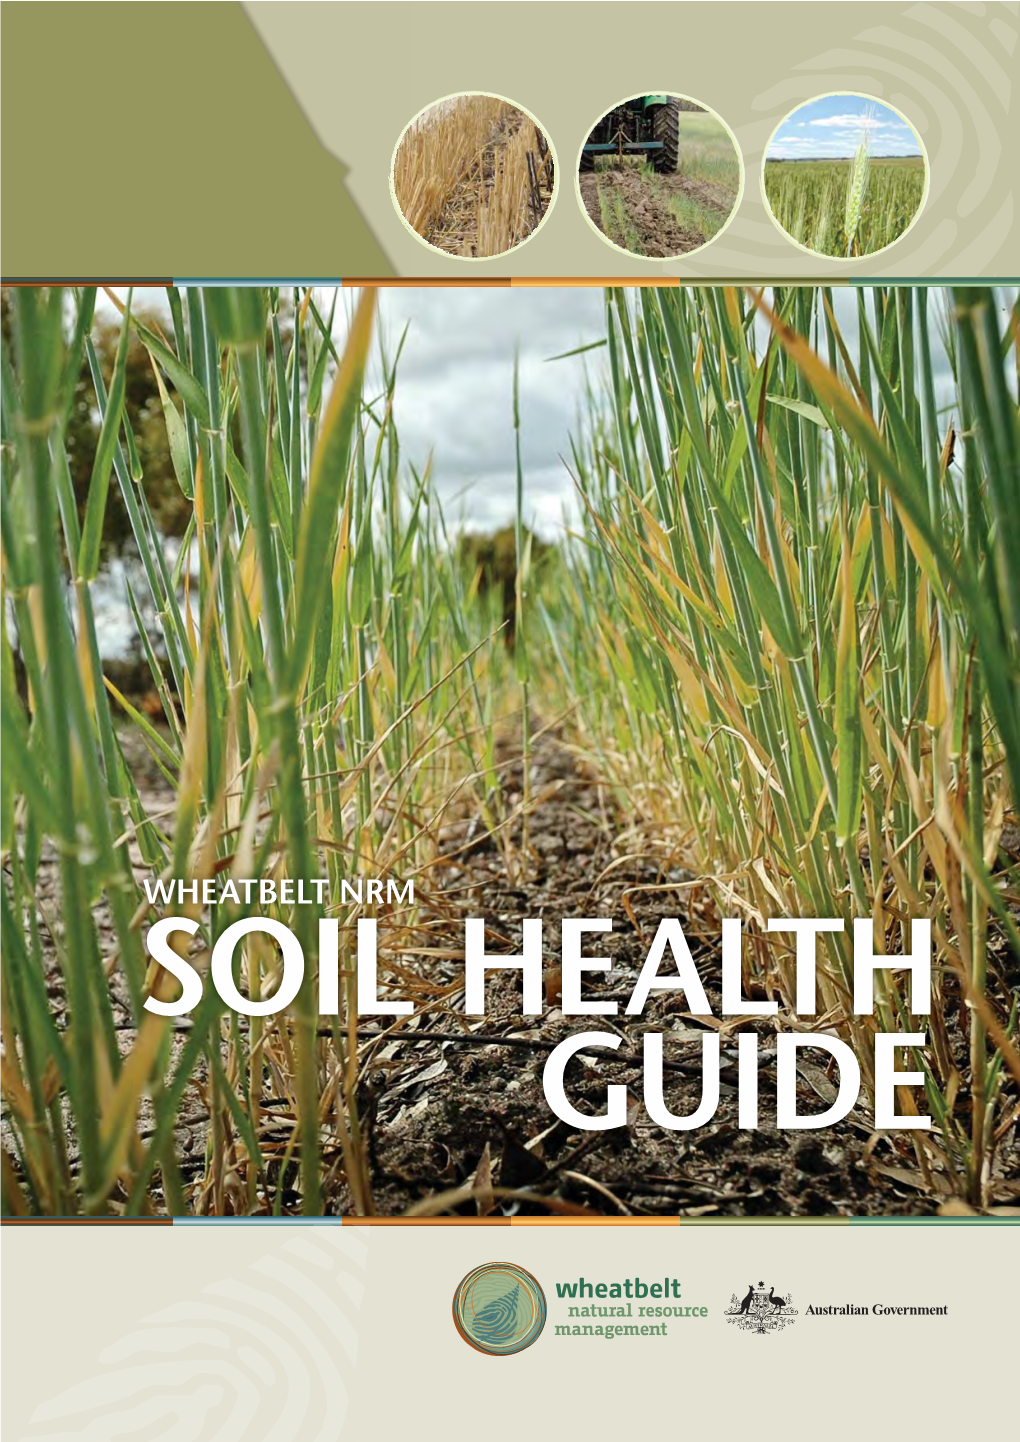 SOIL HEALTH GUIDE WHEATBELT NRM’S VISION ‘To Bring Exemplary Natural Resource Management to the Wheatbelt to Create Healthy Environments and Livelihoods.’